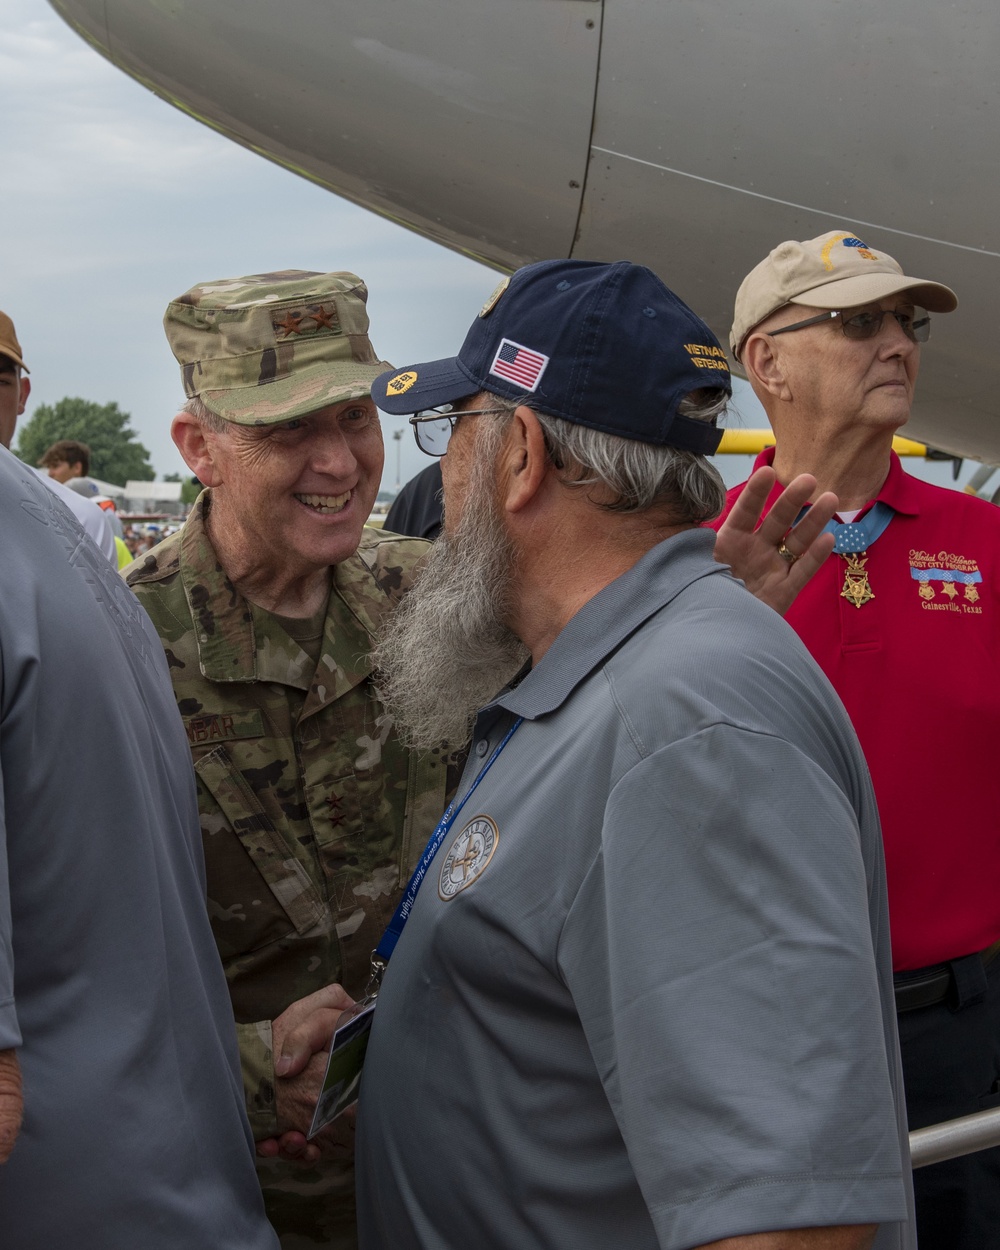 Service members provide support at EAA AirVenture